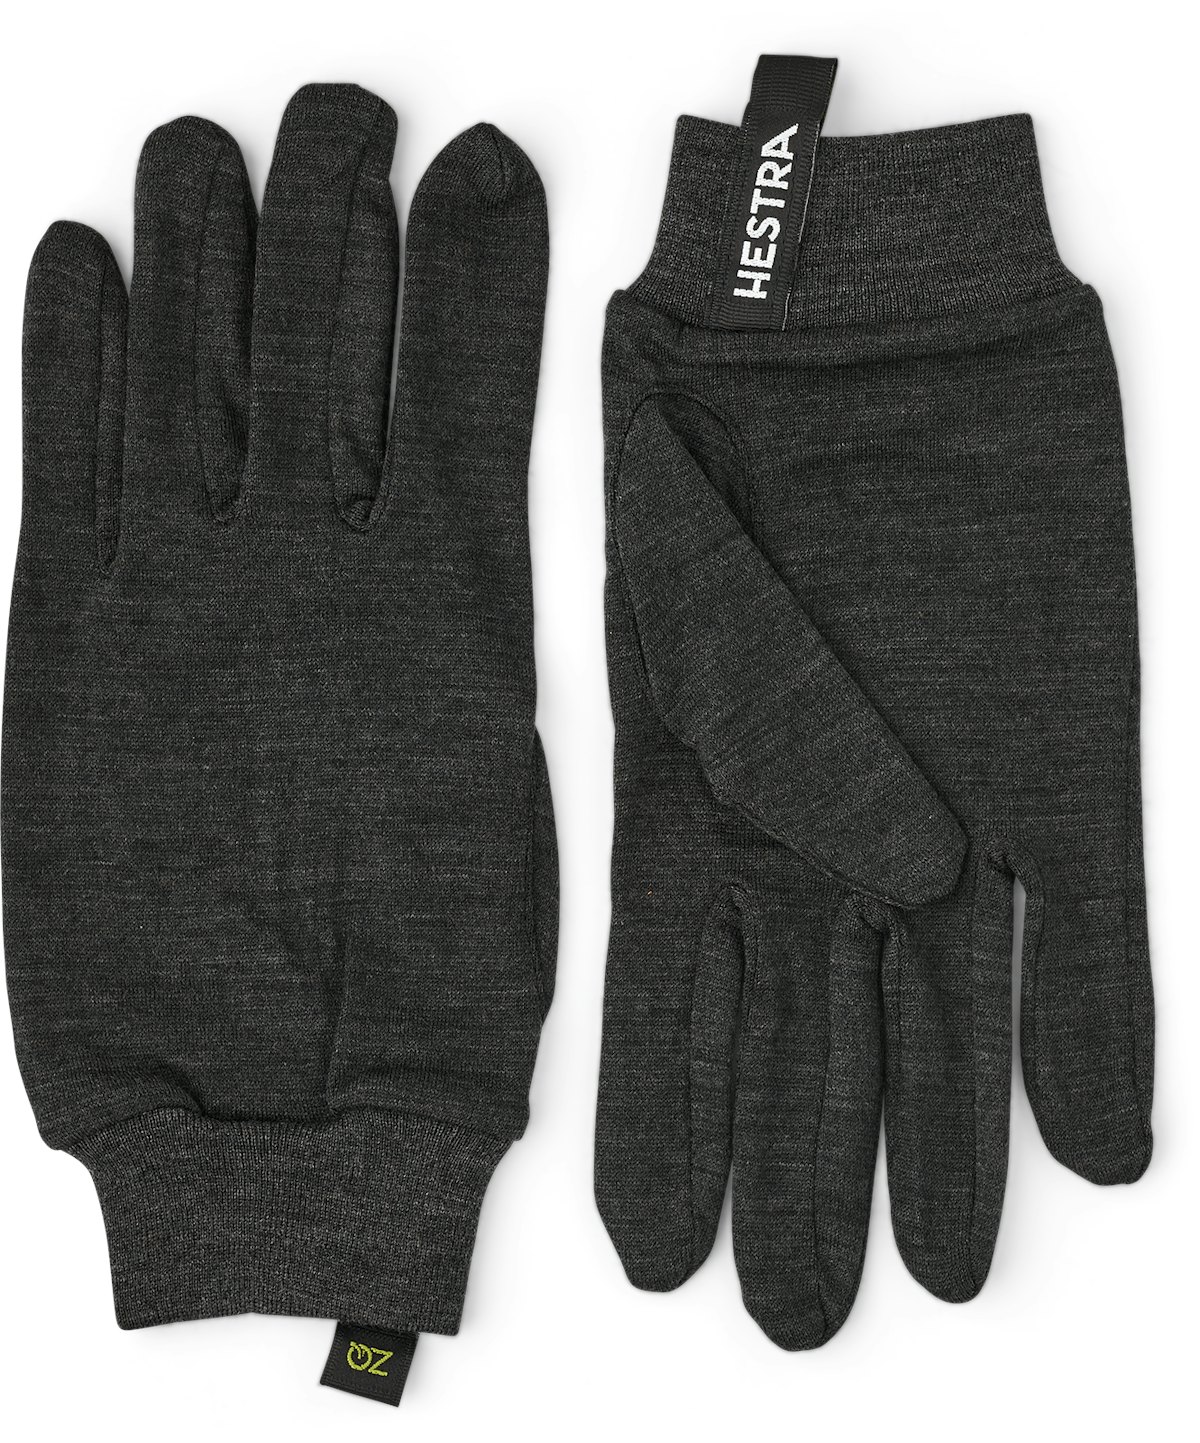 Merino Wool Liner Active - Charcoal Hestra Gloves